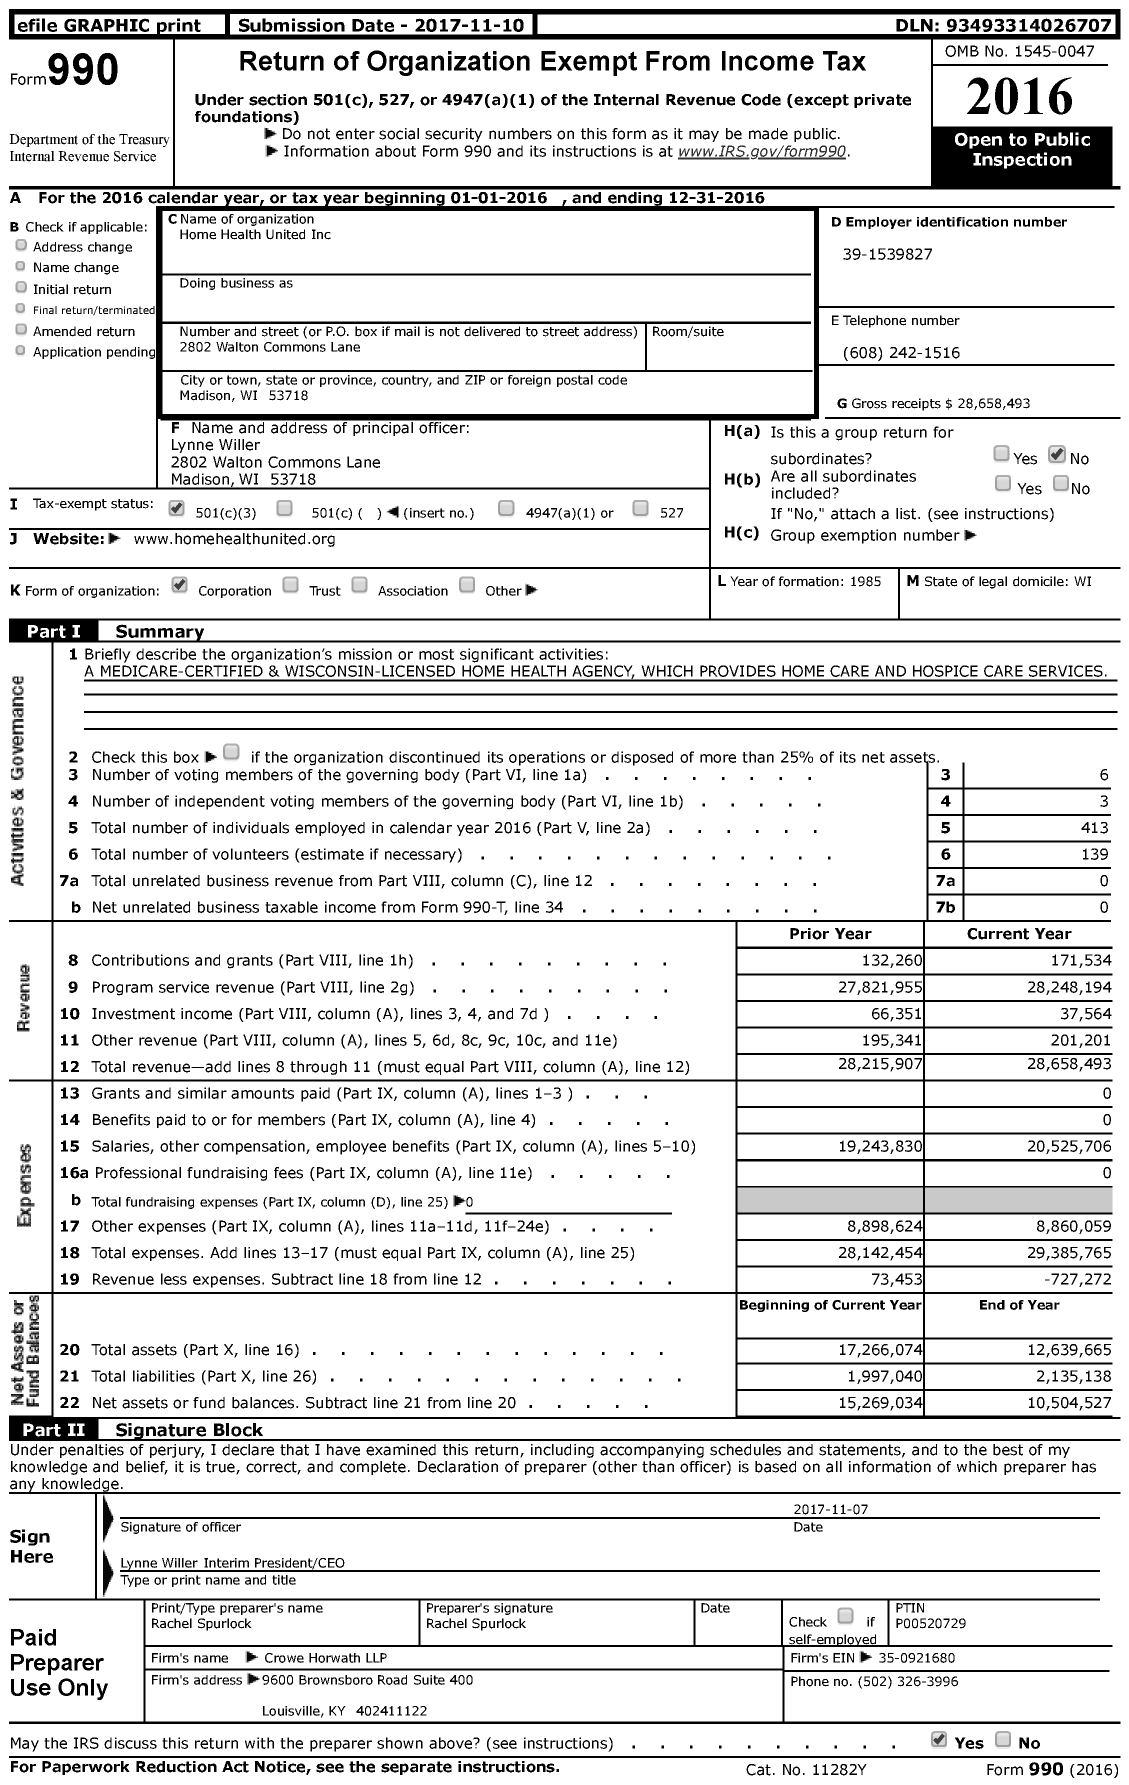 Image of first page of 2016 Form 990 for Home Health United (HHU)